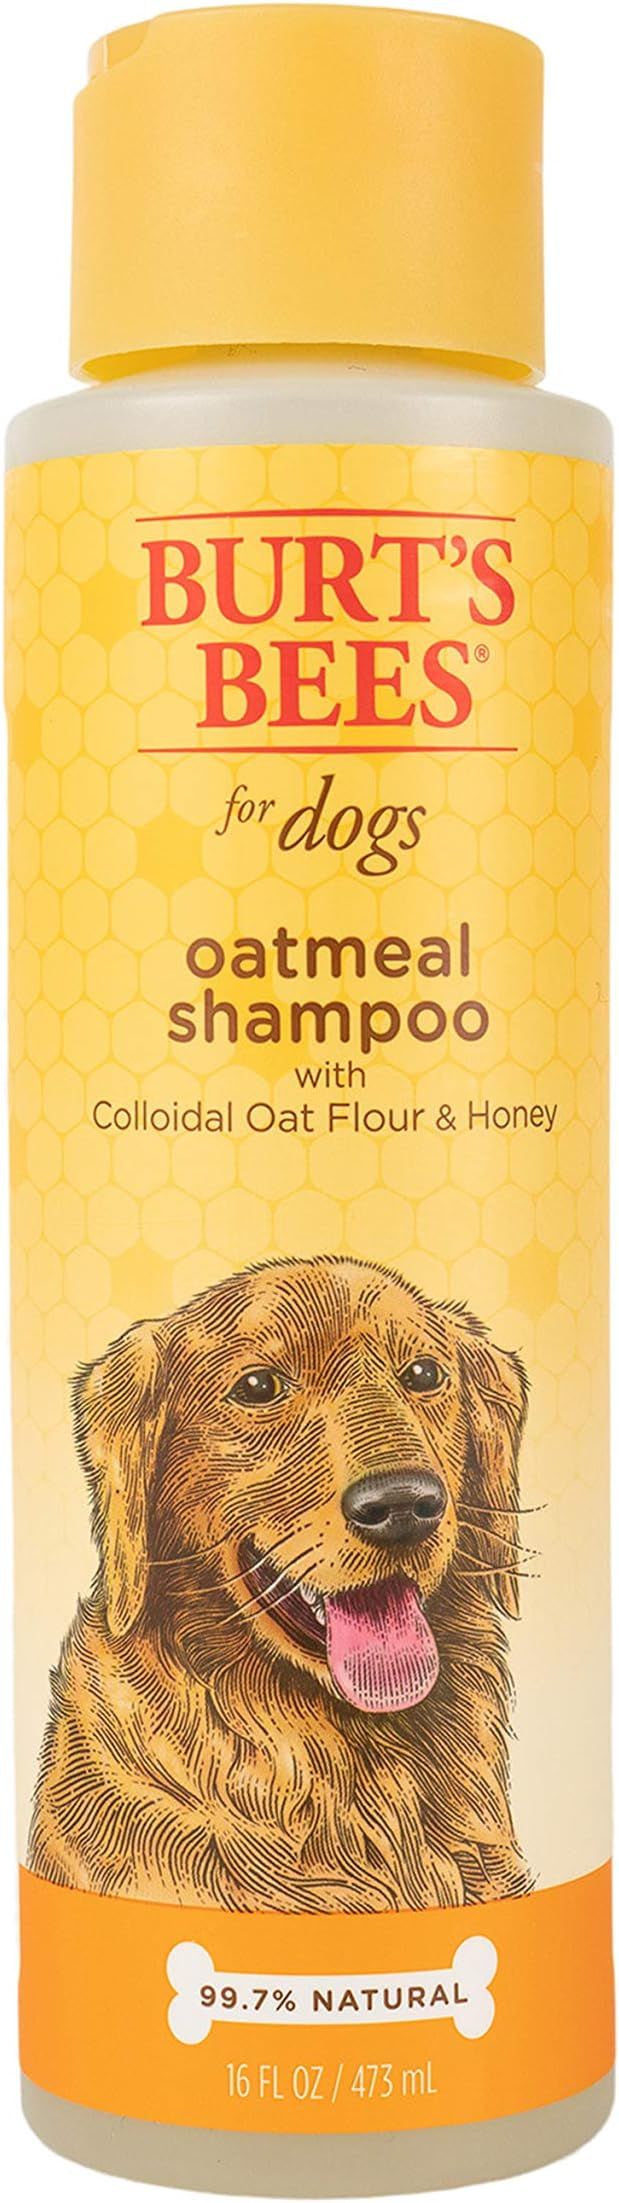 Burt's Bees Natural Shampoo for Dogs, Made with Colloidal Oat Flour and Honey | Amazon (US)